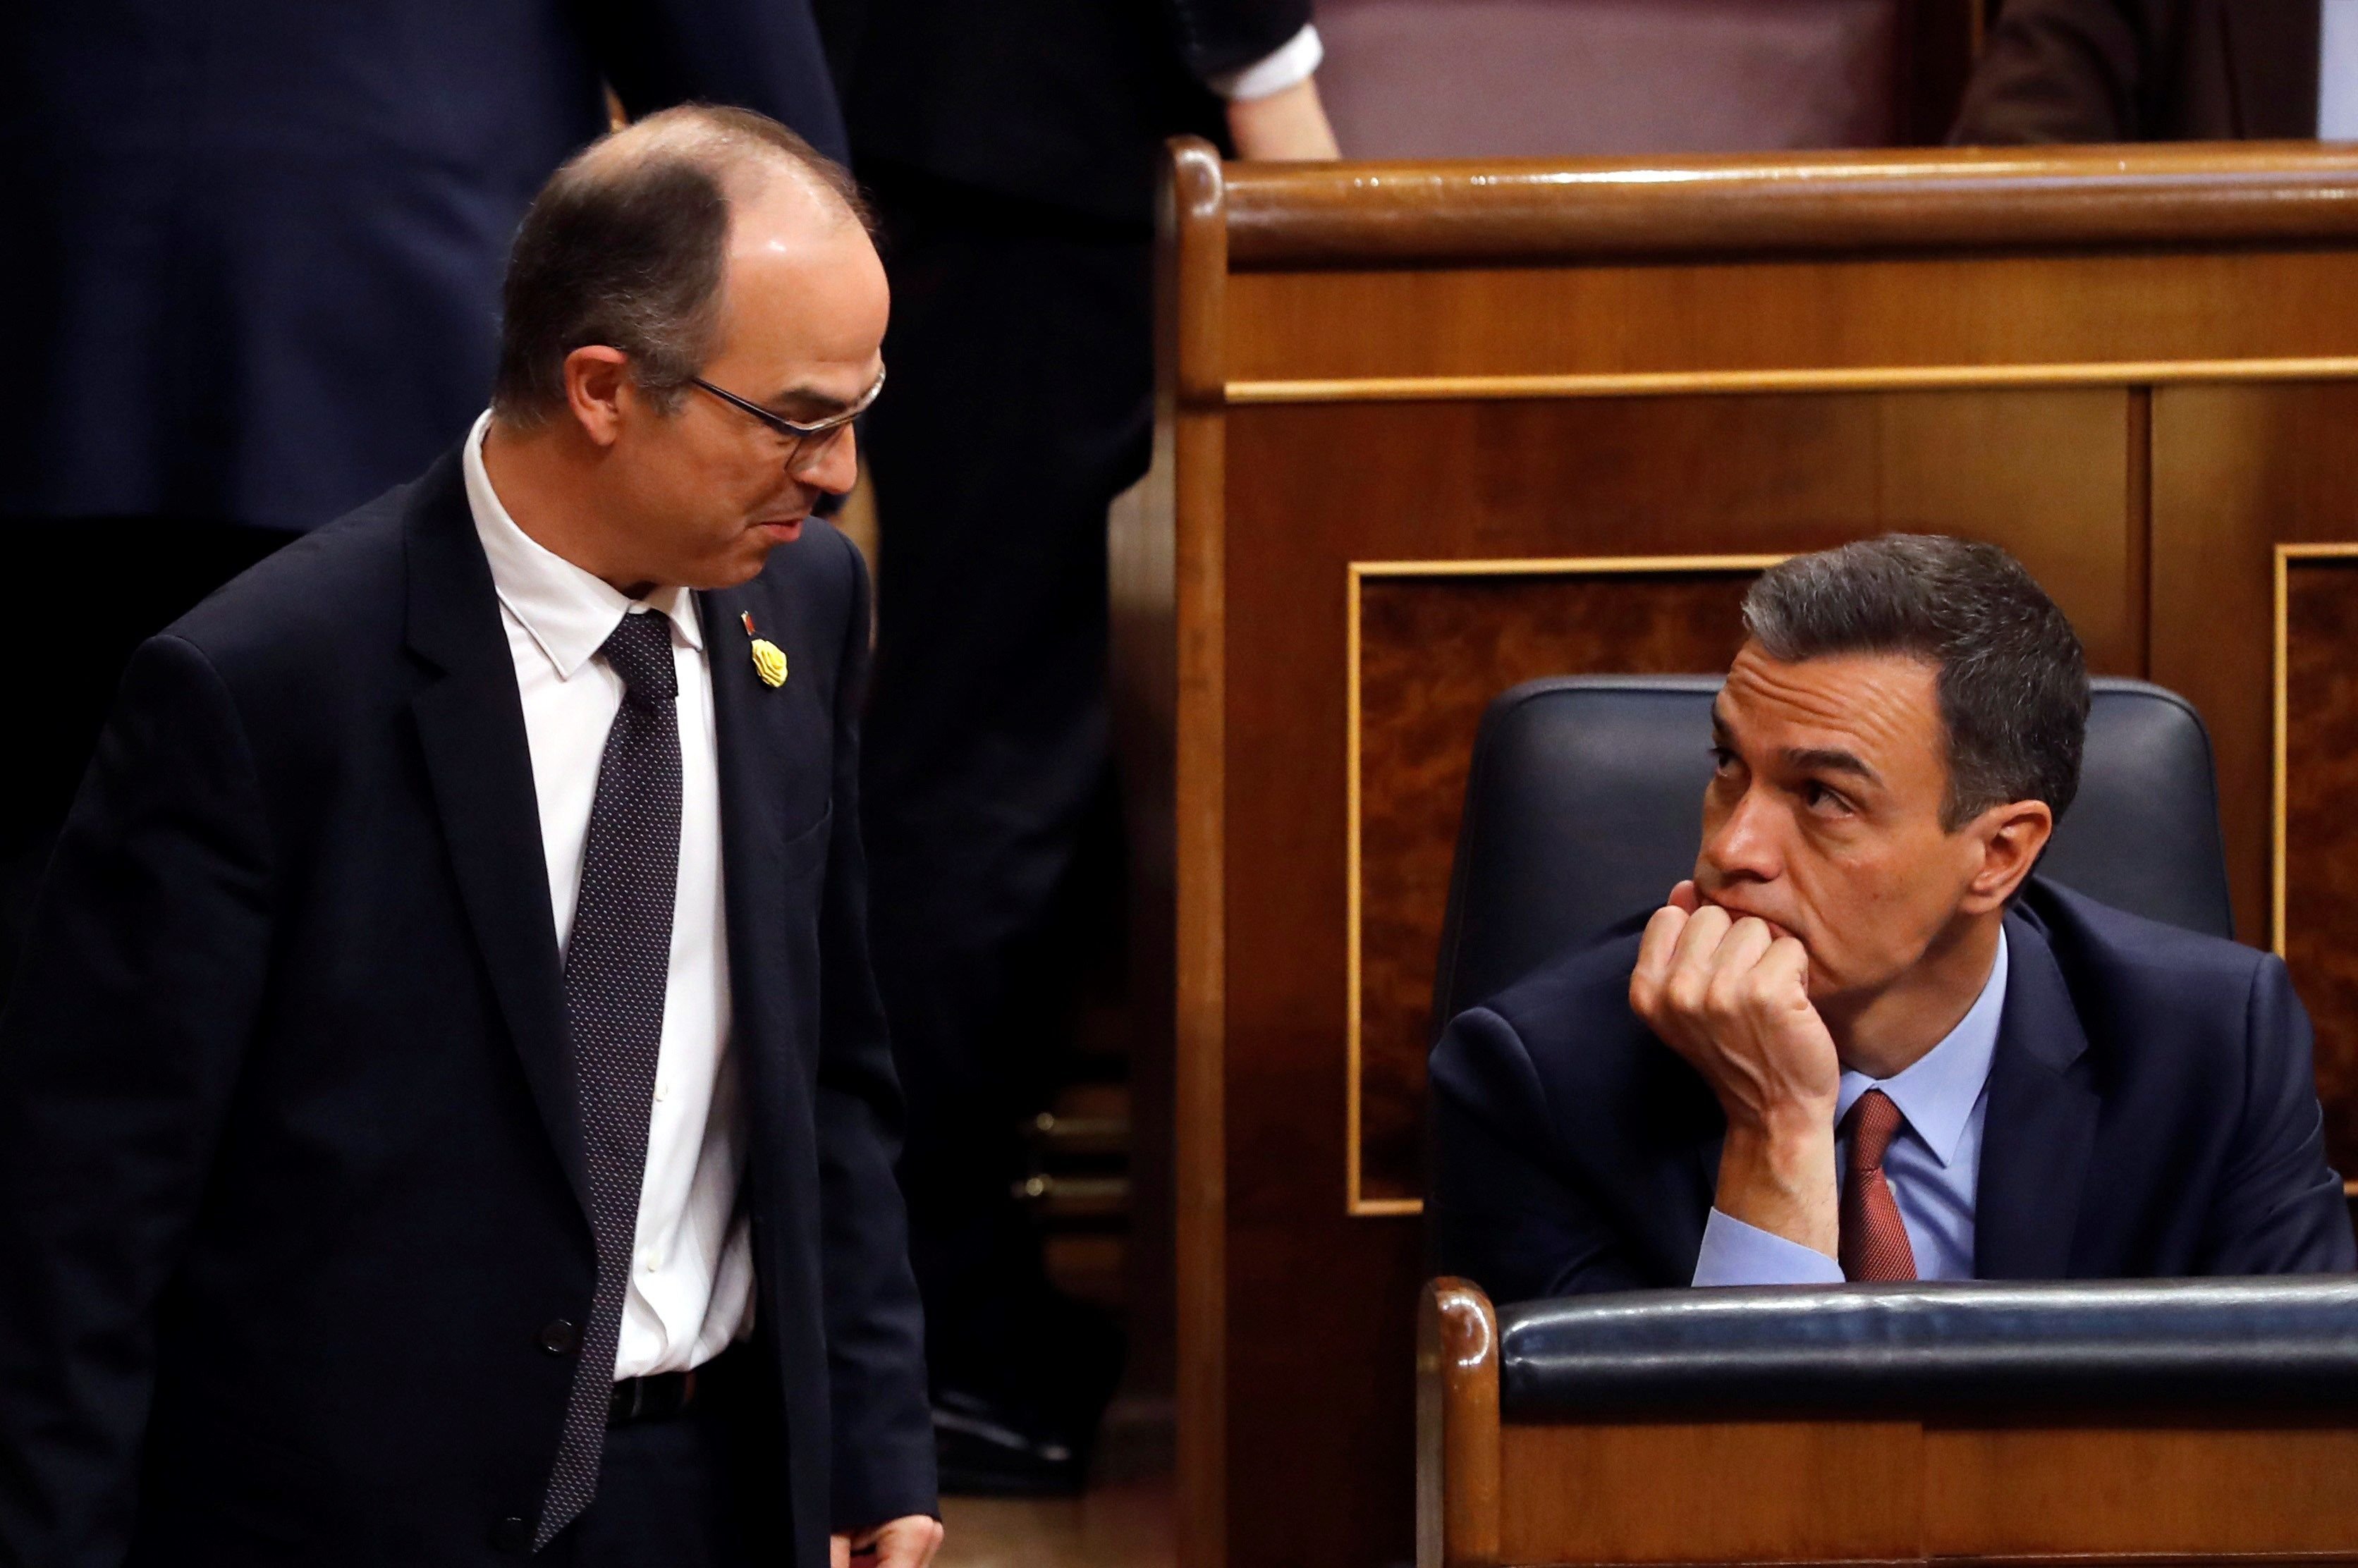 Imprisoned Catalan minister Jordi Turull's account of opening of new Spanish Congress